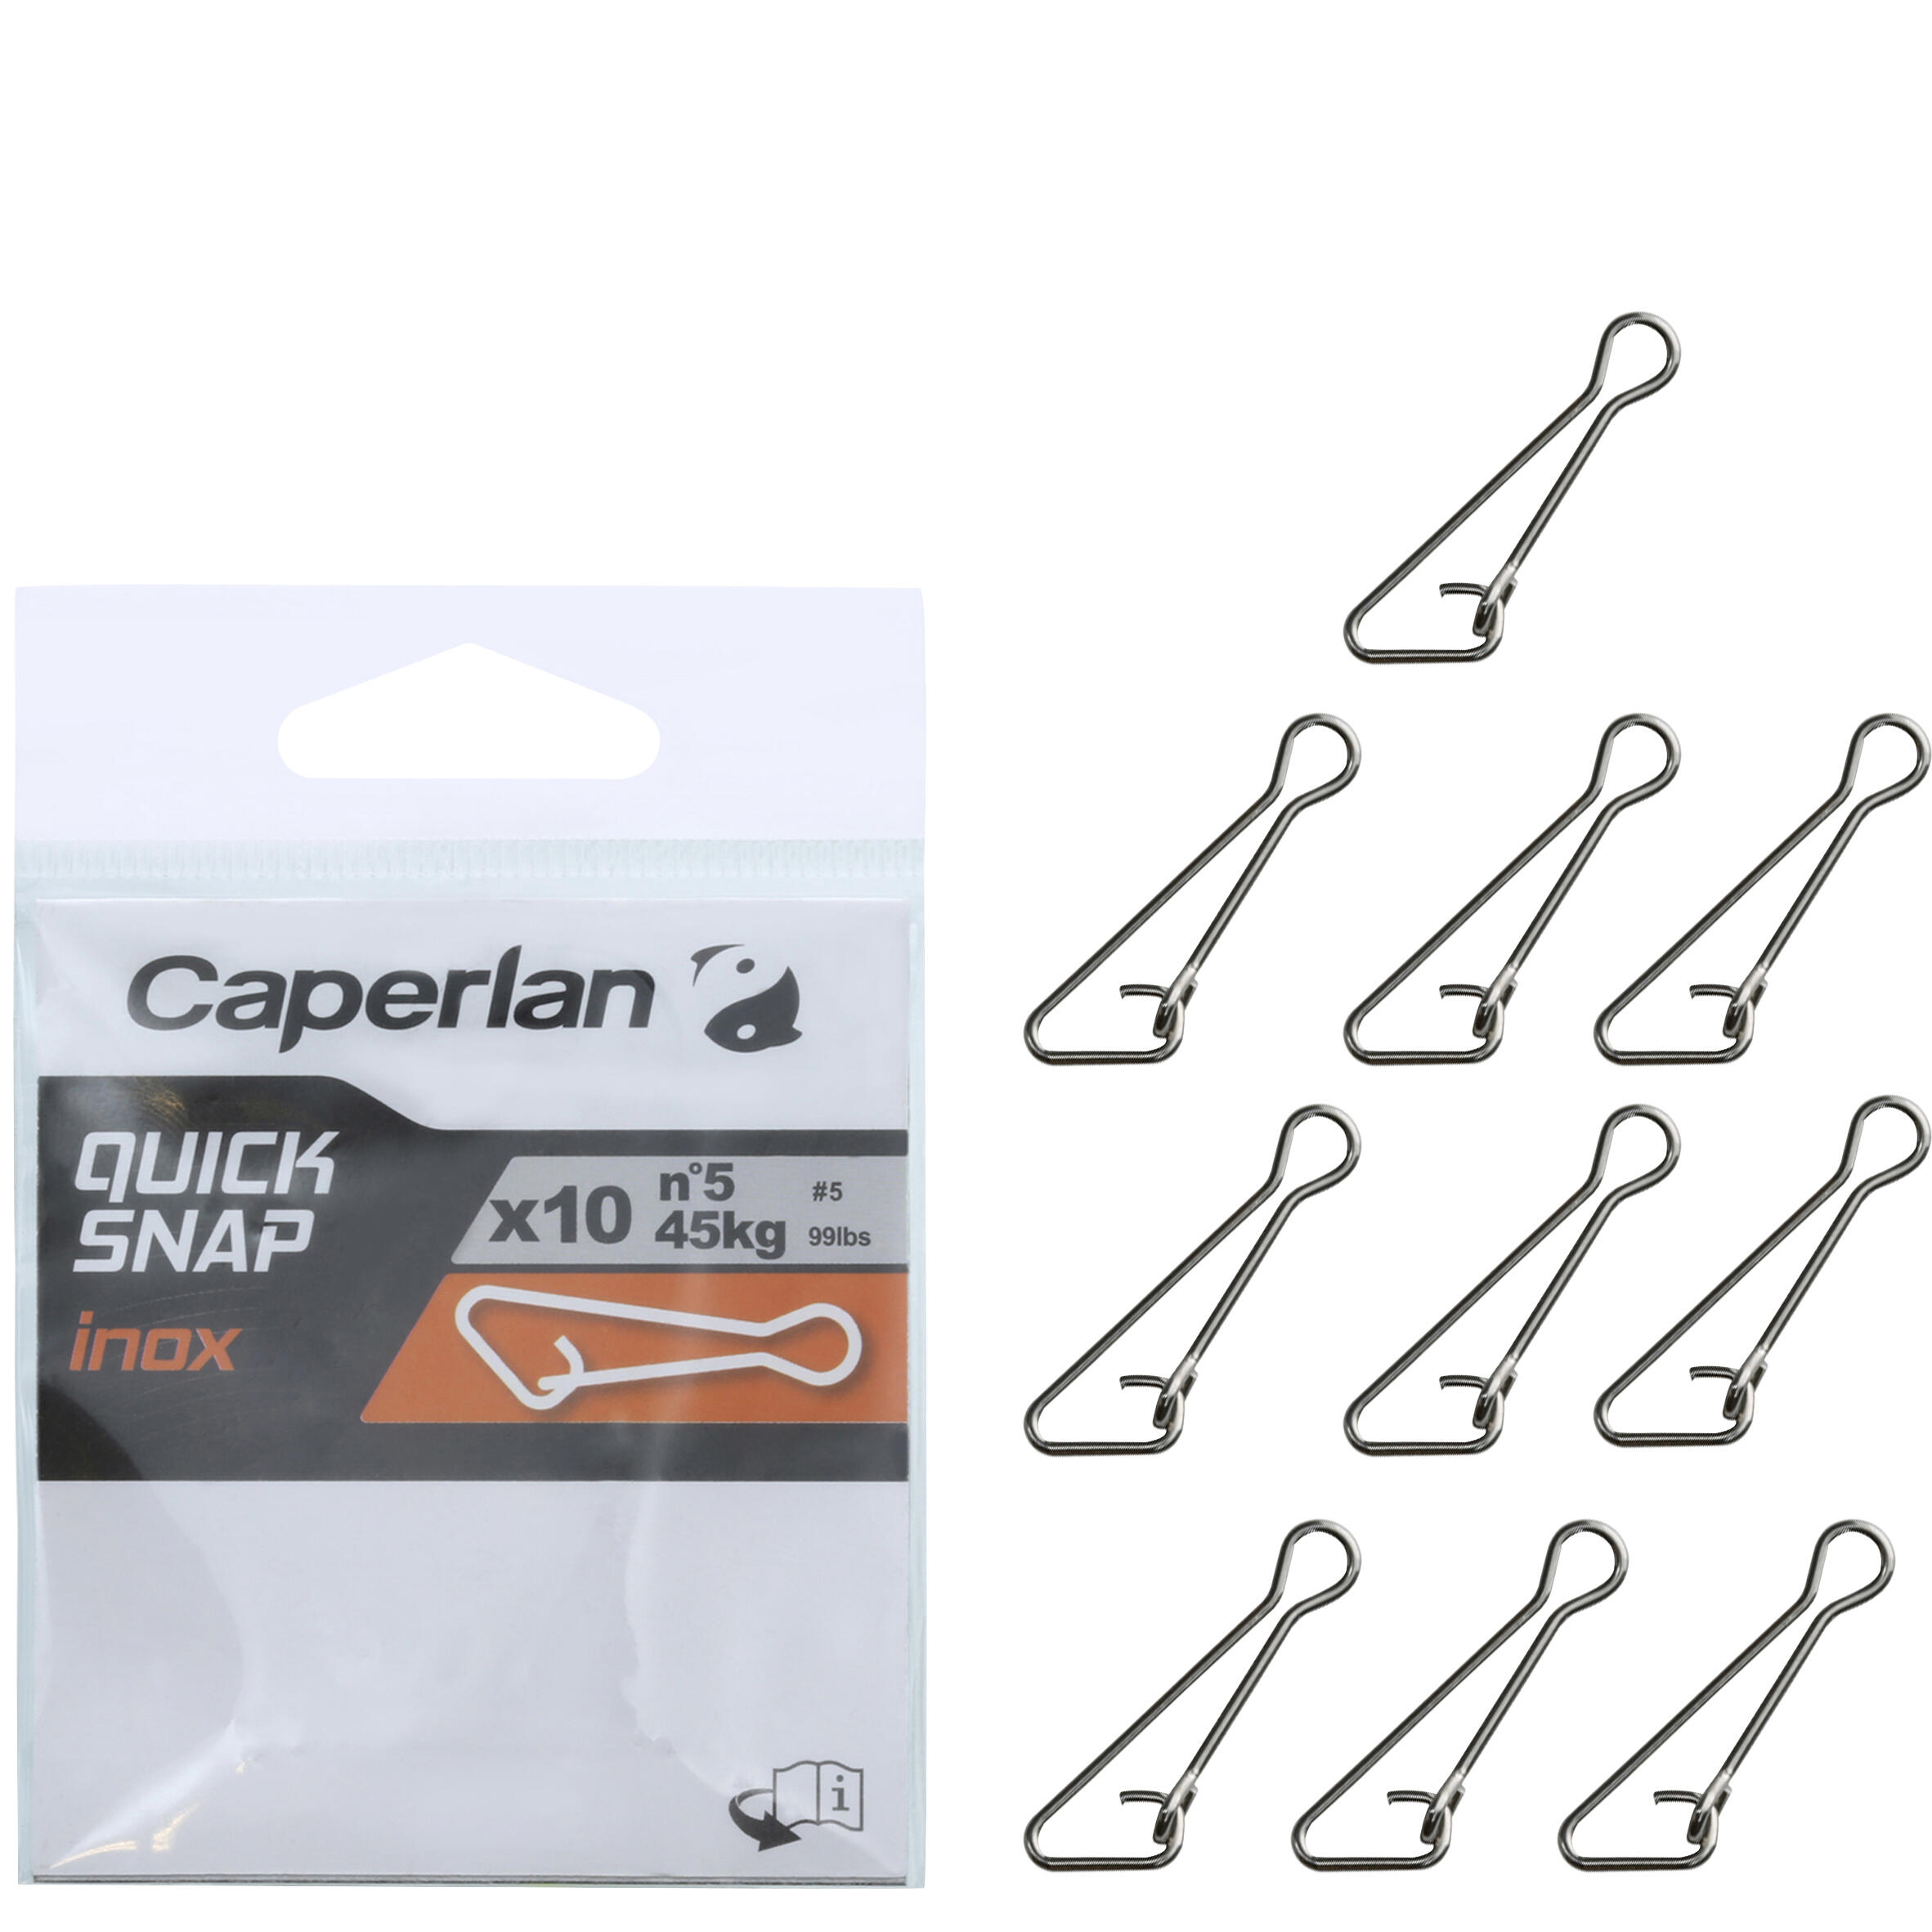 STAINLESS STEEL QUICK SNAP FISHING CLIP X10 CAPERLAN